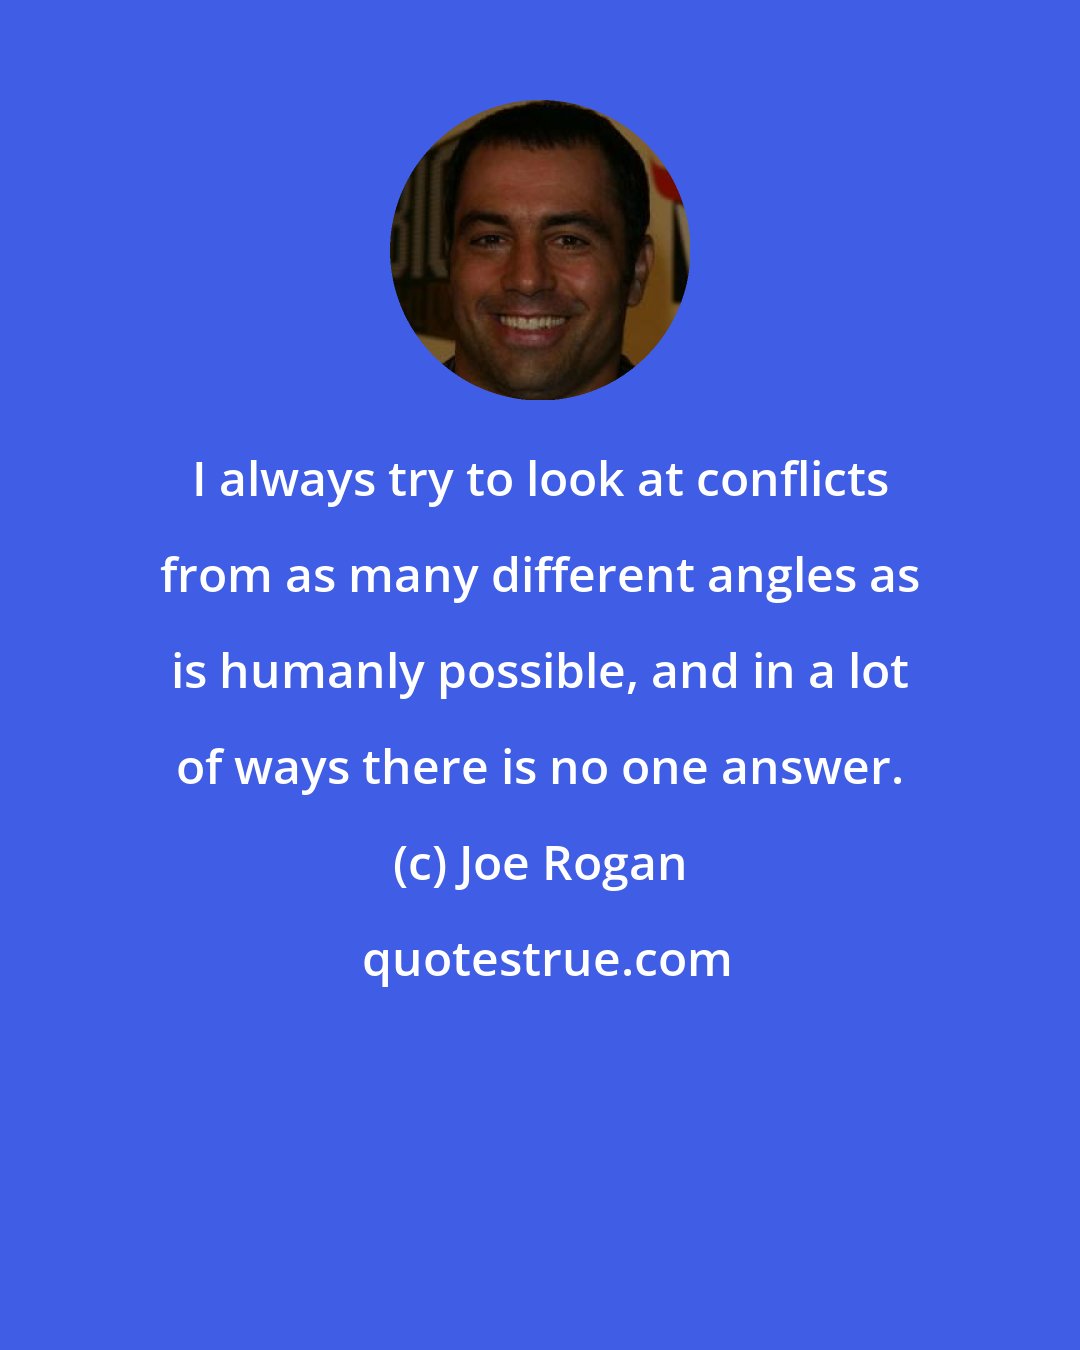 Joe Rogan: I always try to look at conflicts from as many different angles as is humanly possible, and in a lot of ways there is no one answer.